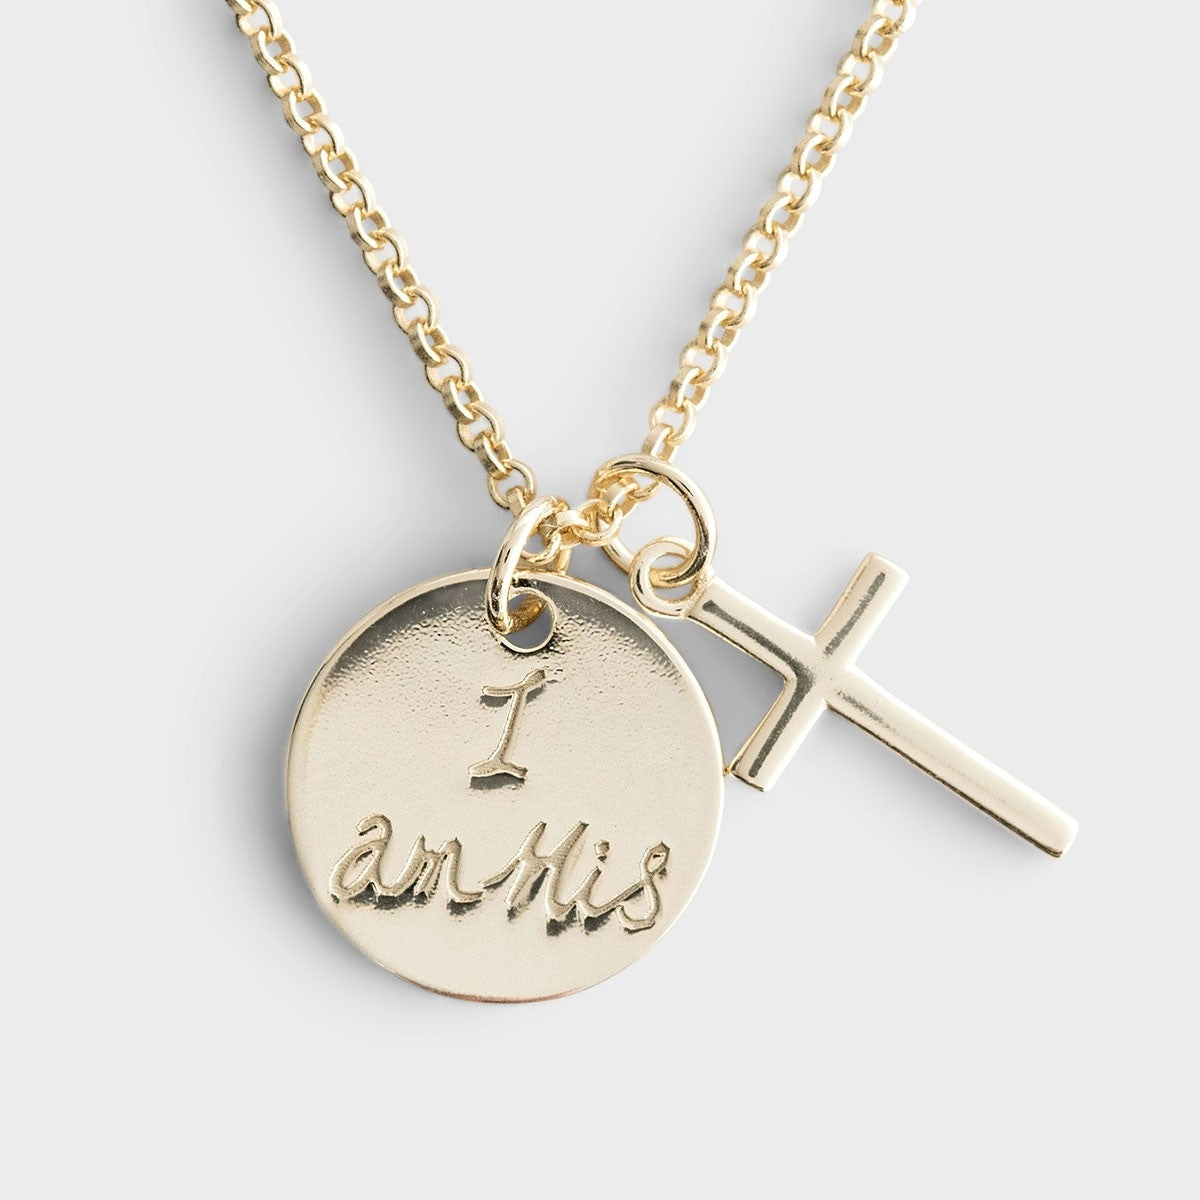 Image of I Am His - Gold Cross Pendant Necklace with Charm other